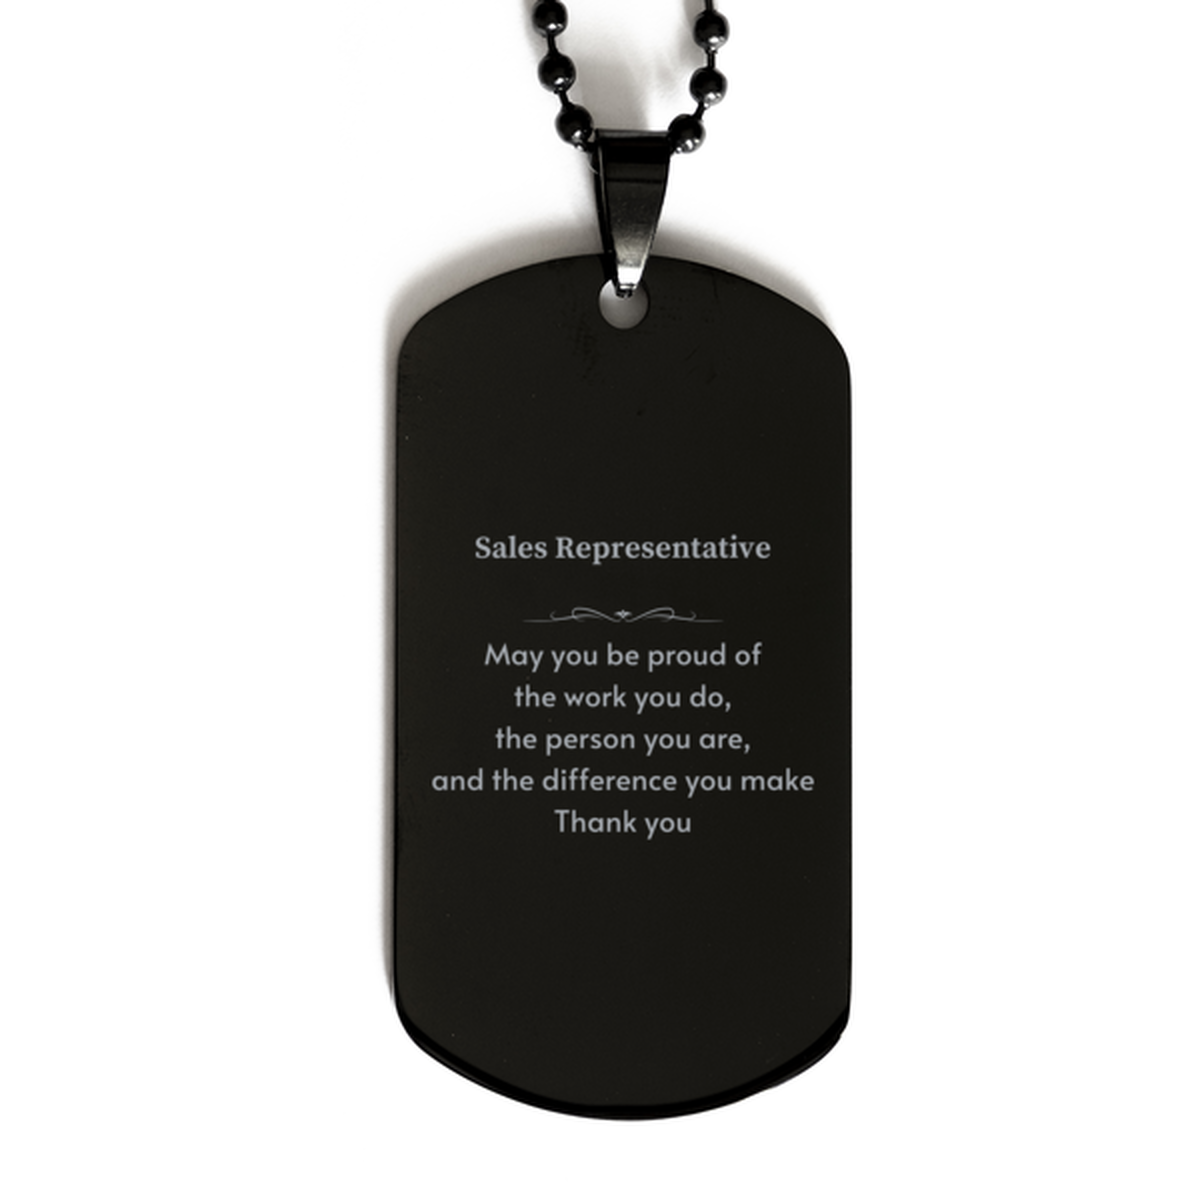 Heartwarming Black Dog Tag Retirement Coworkers Gifts for Sales Representative, Sales Representative May You be proud of the work you do, the person you are Gifts for Boss Men Women Friends